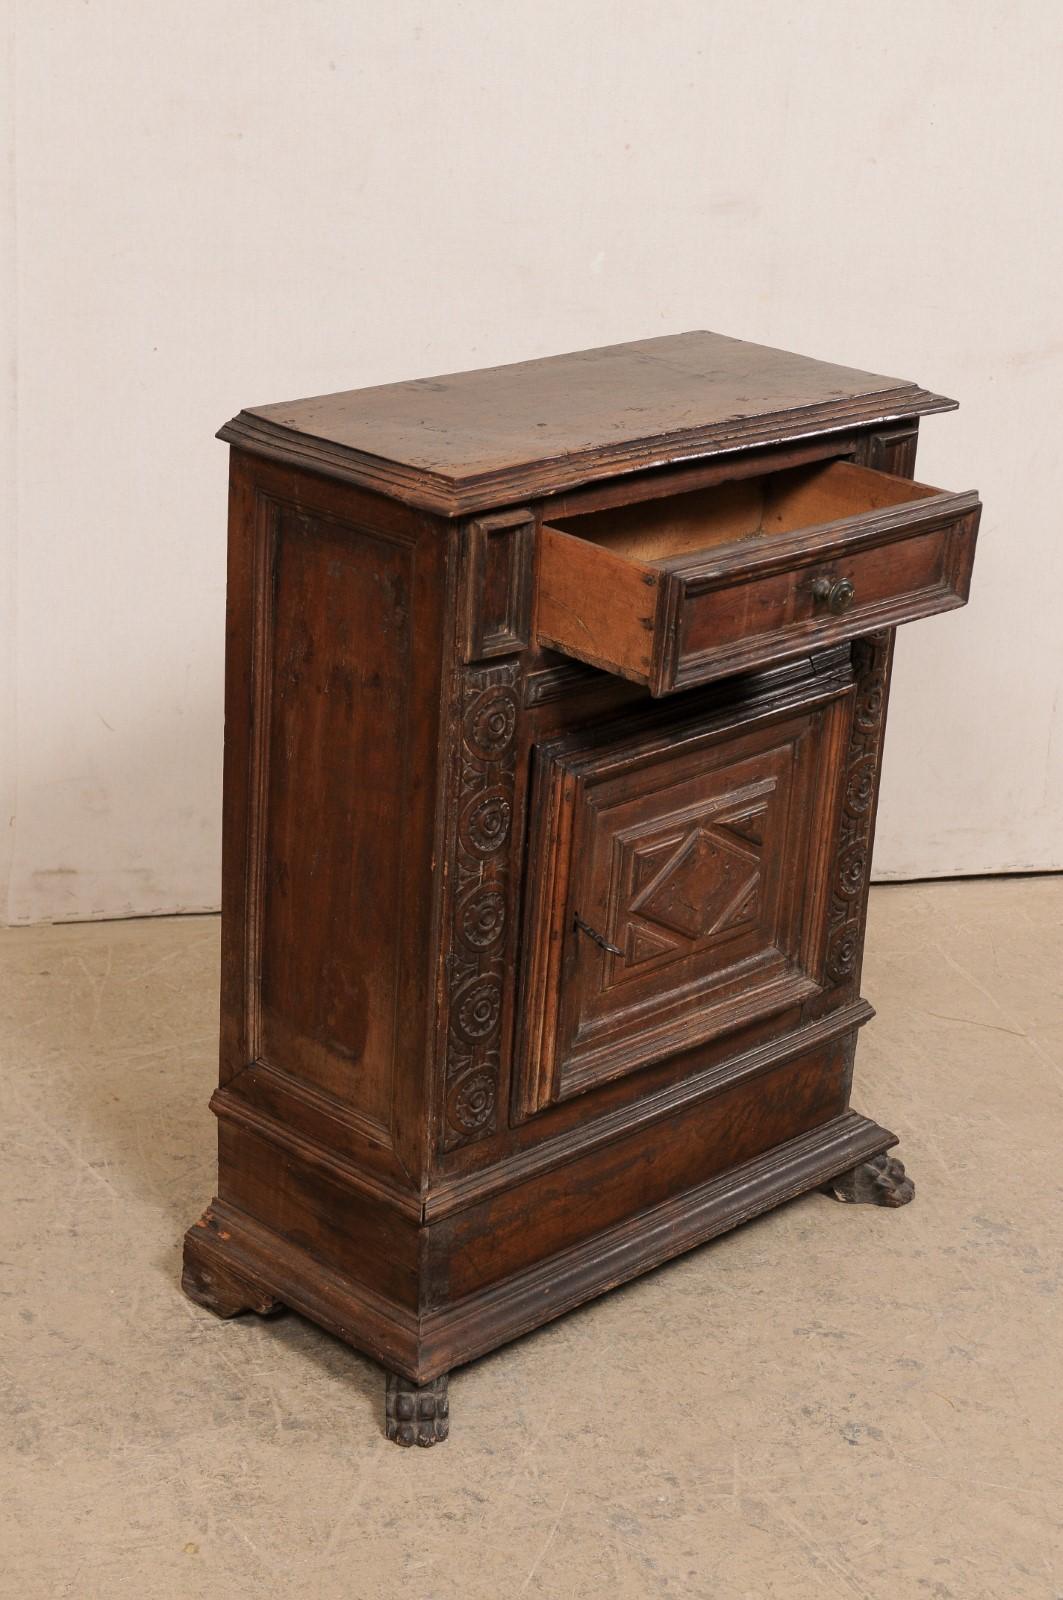 Wood Italian Small-Sized Carved Walnut Cabinet on Paw Feet, Turn of 17th & 18th C. For Sale